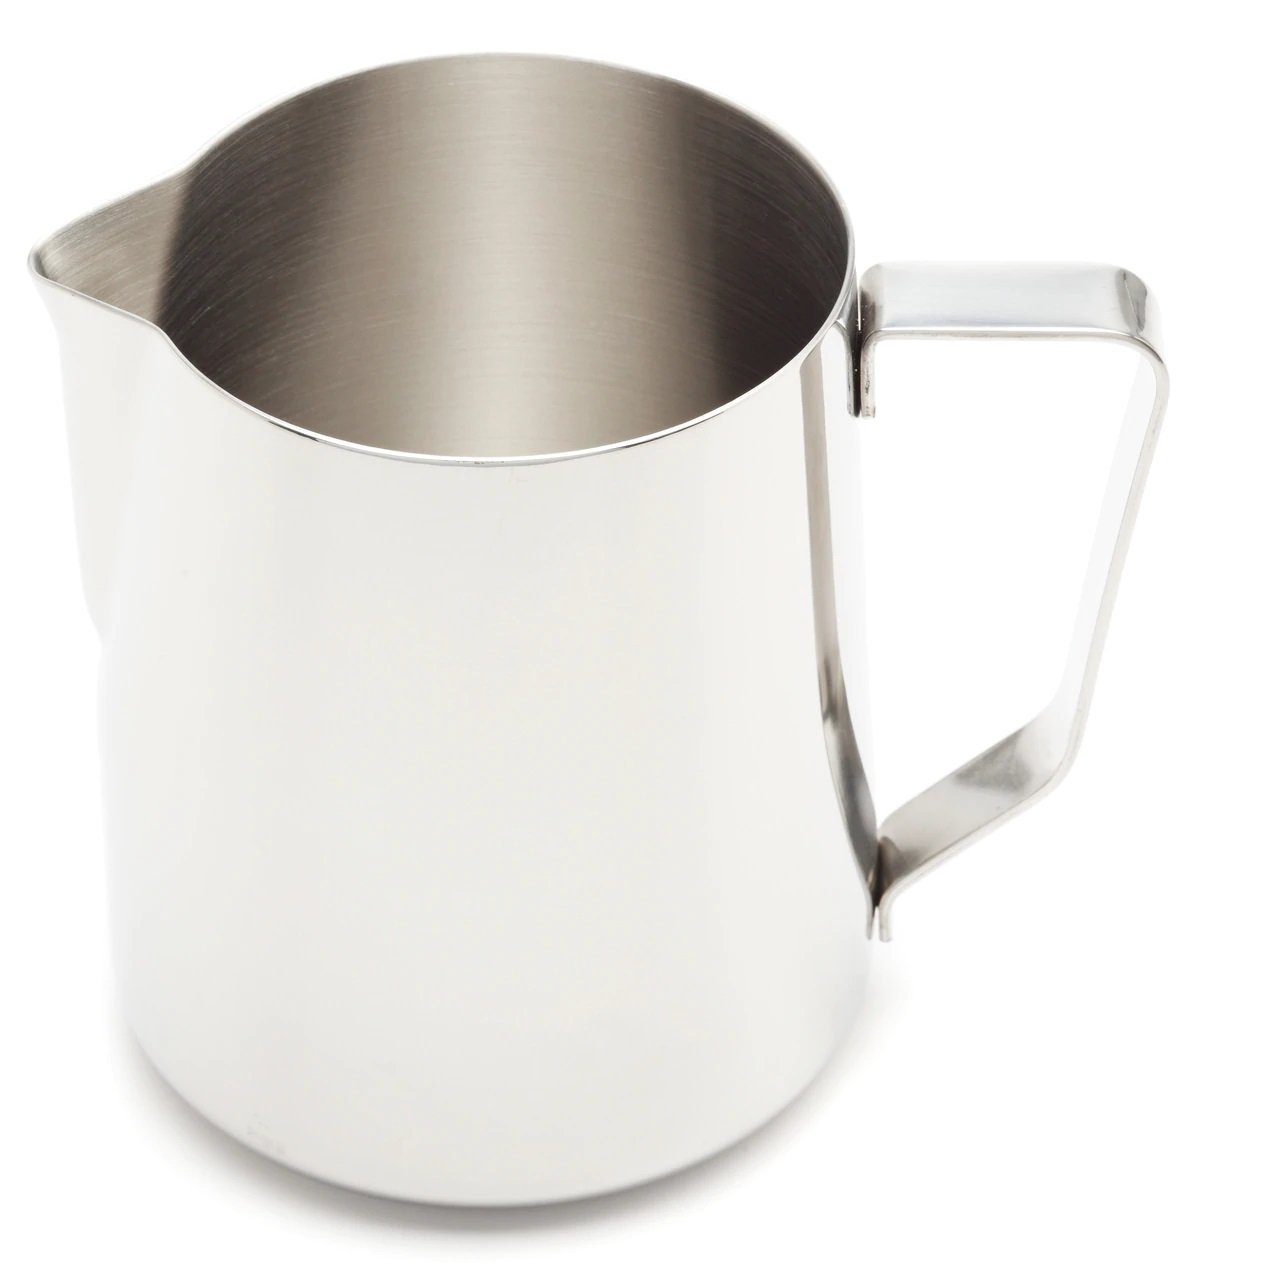 https://www.jlhufford.com/cdn/shop/products/revolution-revolution-classic-stainless-steel-steaming-pitcher-jl-hufford-frothing-pitchers-28072699134129.jpg?v=1615405864